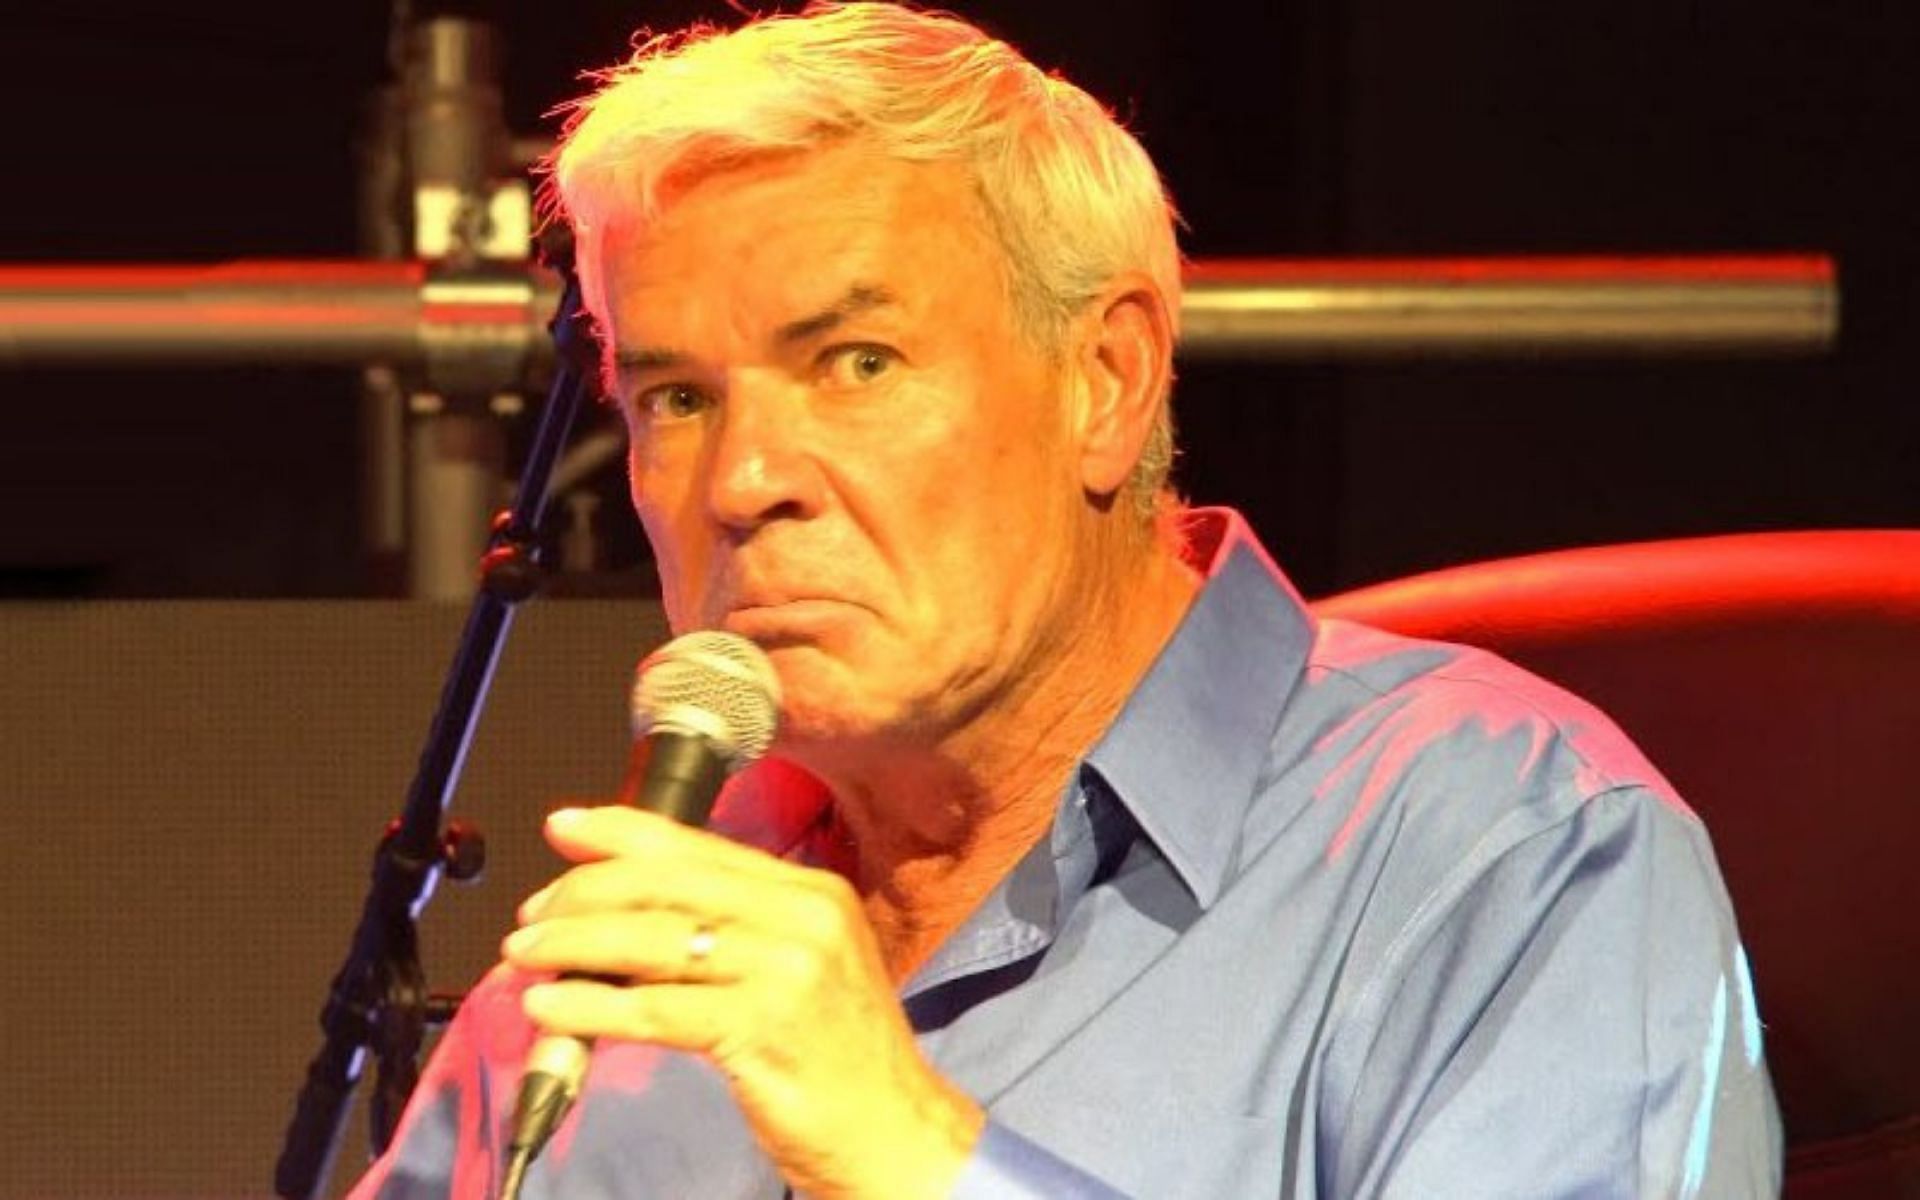 Eric Bischoff led WCW in the Monday Night Wars against Vince McMahon&#039;s WWE